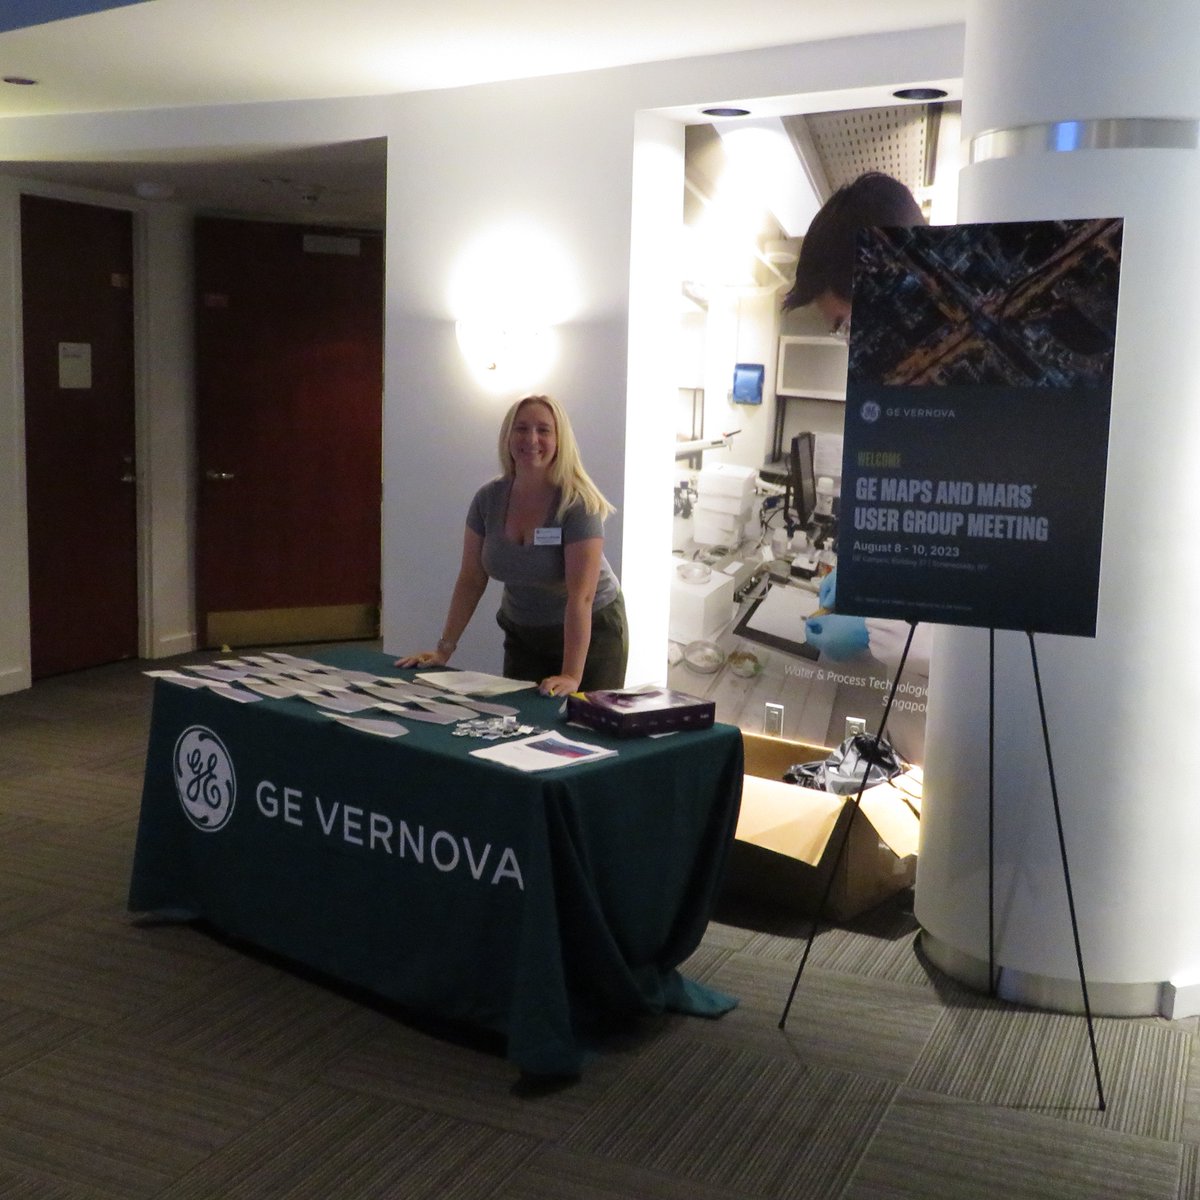 Highlights from Day 1 from the GE MAPS & MARS User Group Meeting at our GE Campus in Schenectady, NY. Special thanks to our partners from NPCC, NYISO, Iowa State, and Penn State for sharing insights with all participants. For more info, visit bit.ly/43o0zZ6. #GEVernova